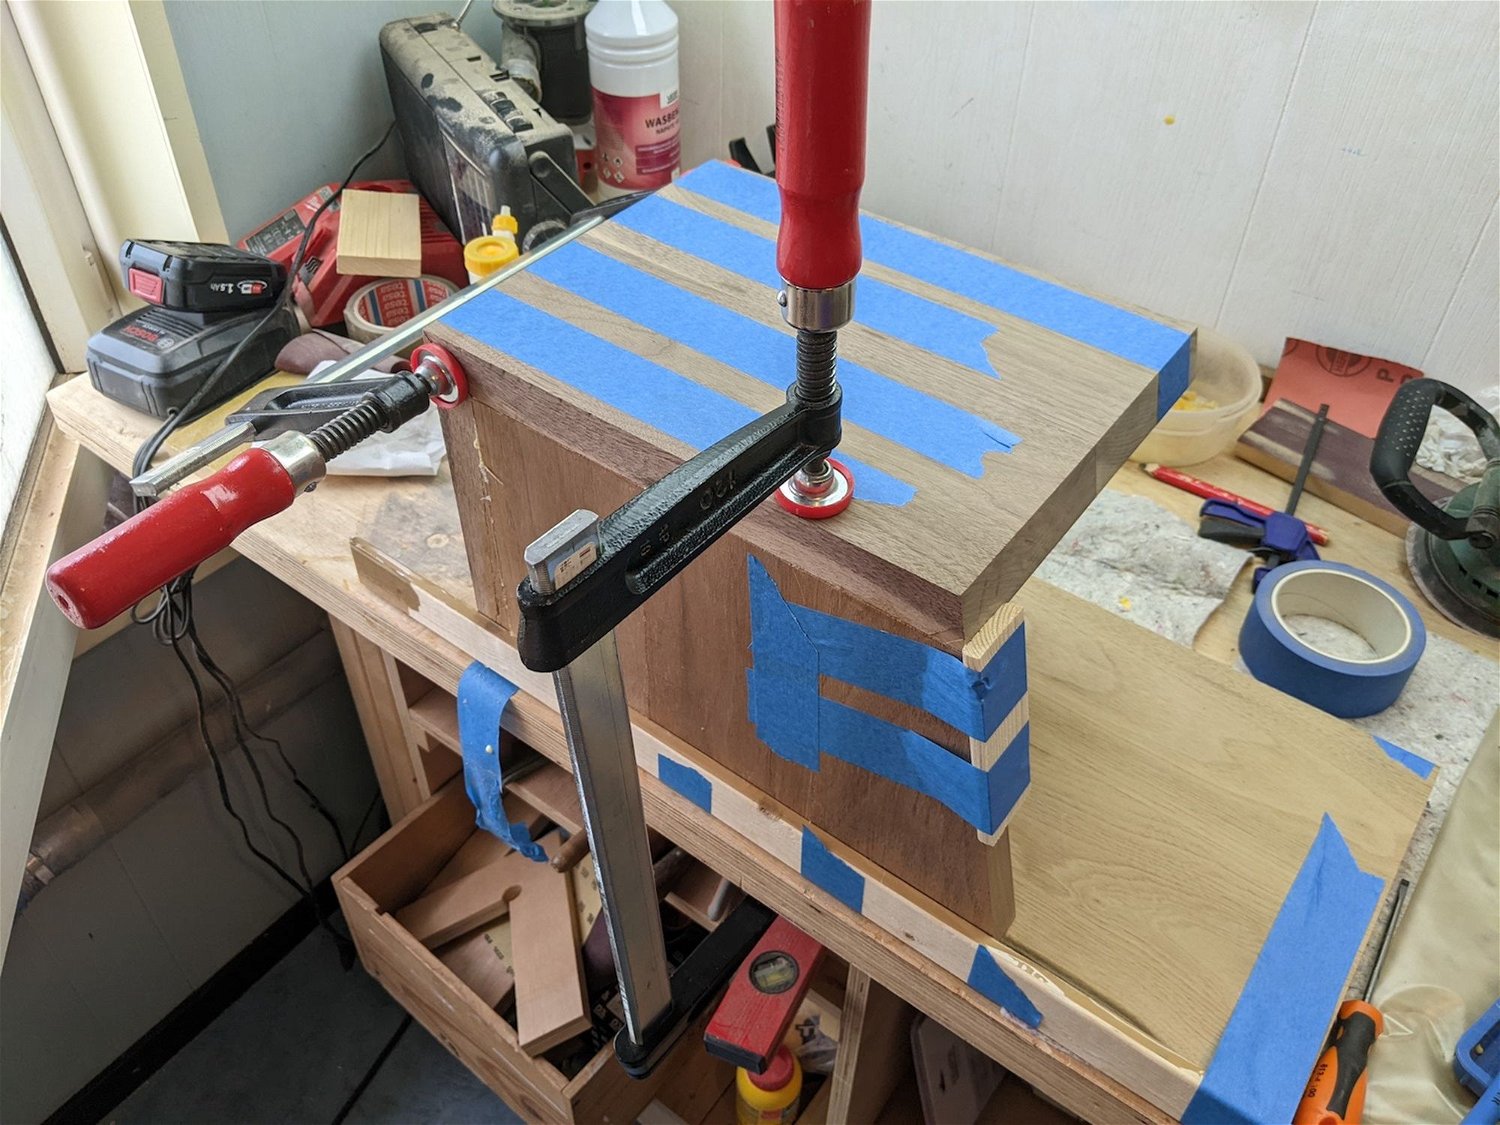 Decided to glue up and figure out the problems down the road